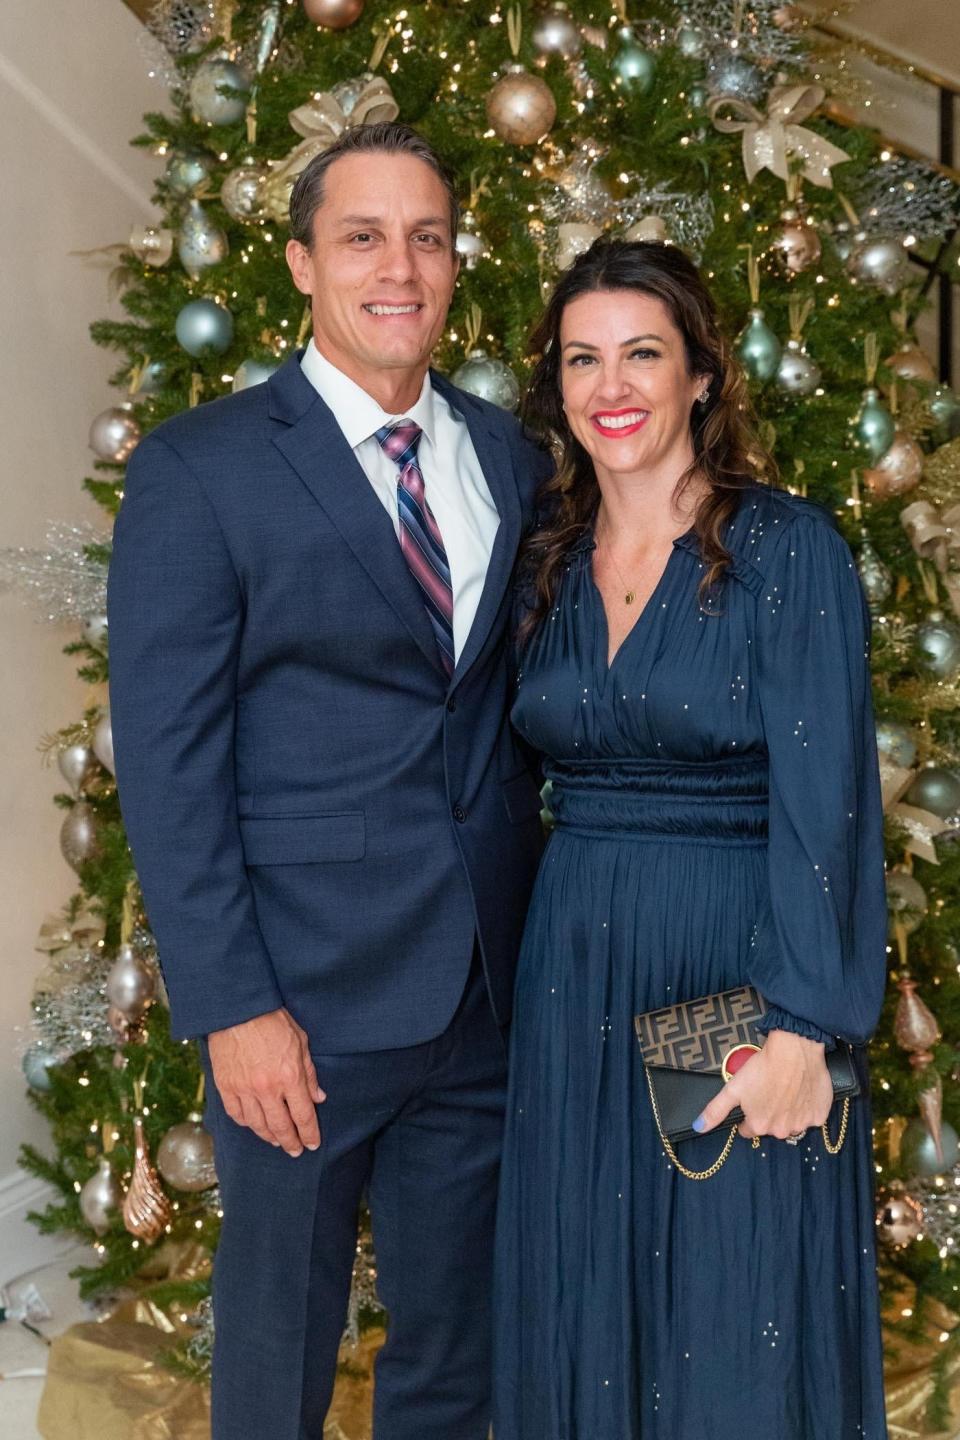 Jake Laas and Julia Caner attend the 28th annual Holiday Bazaar, a Nov. 30 benefit for New Hope Charities. This year's event is slated for Dec. 5.